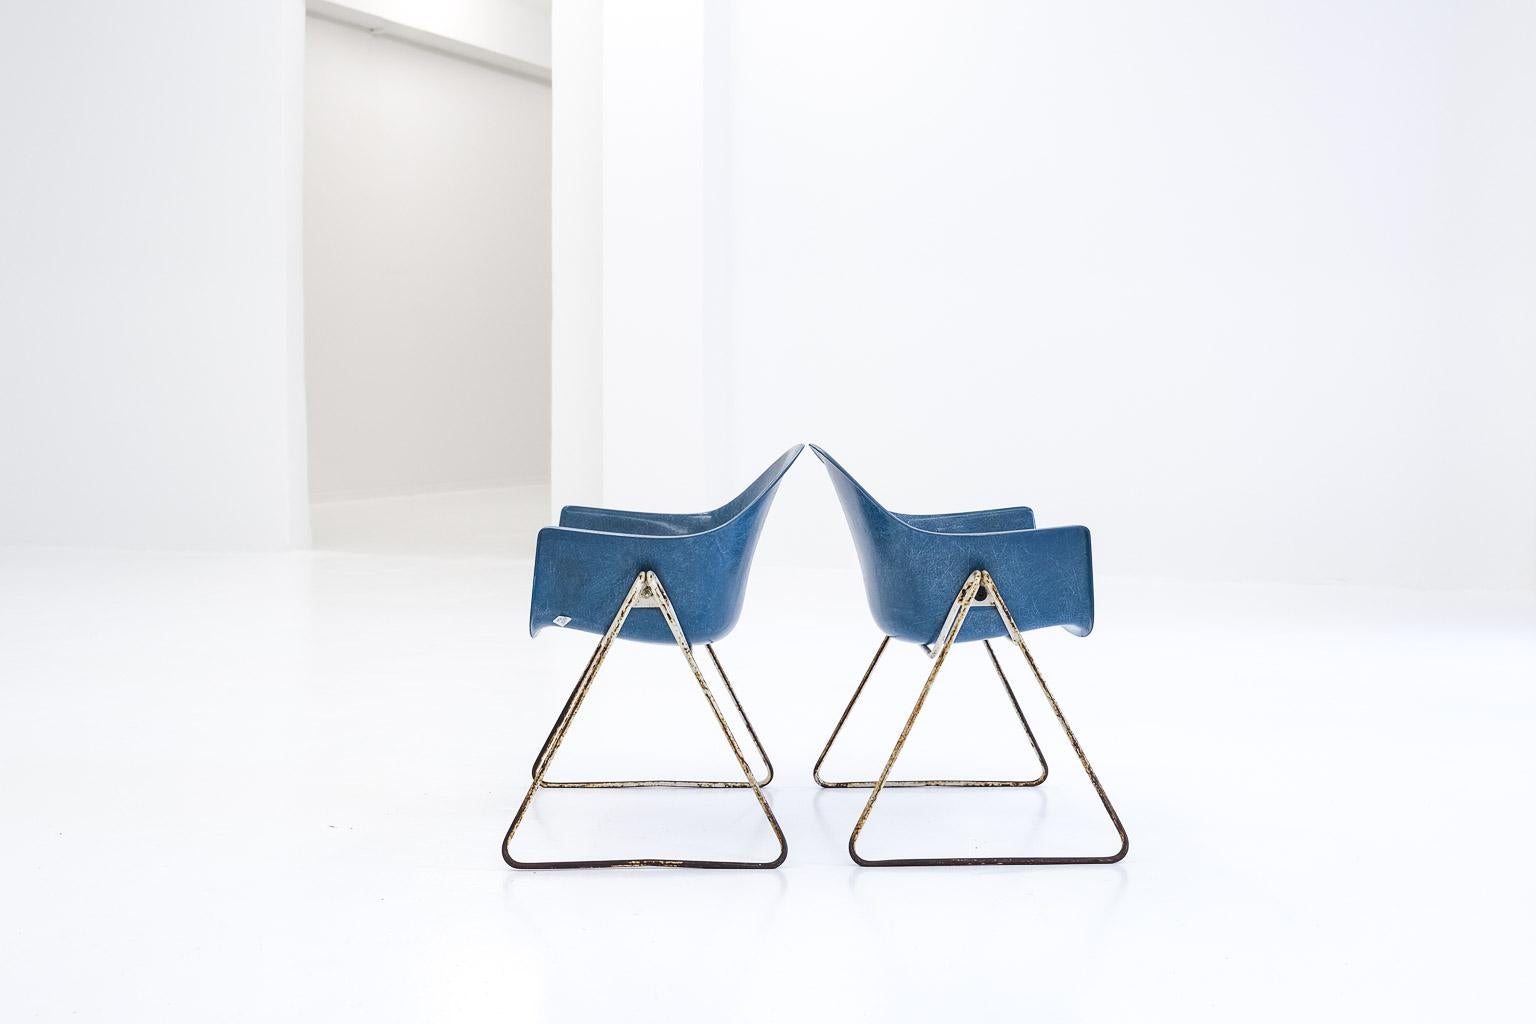 Steel Set of 2 children chairs 2015 by Walter Papst for Wilkhahn, 1961 For Sale